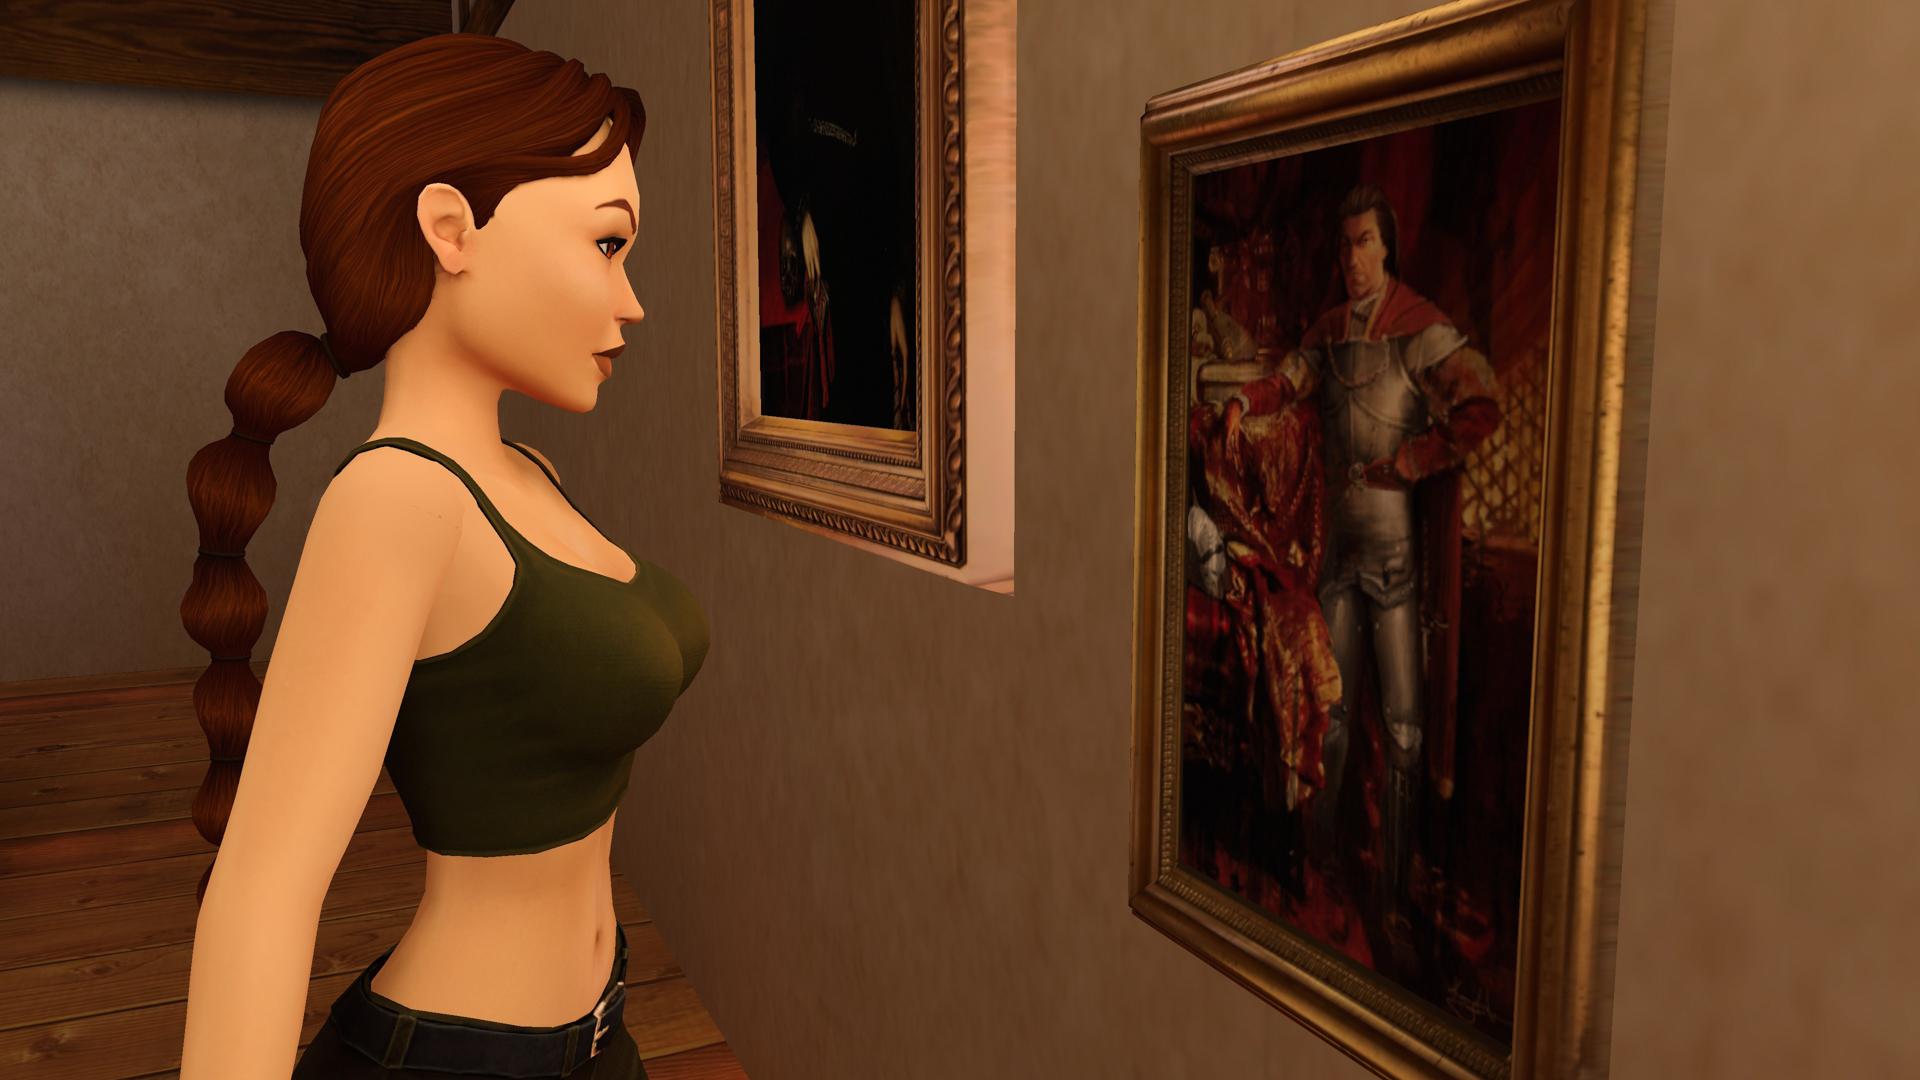 Lara looking at the portrait of Kain in Croft manor